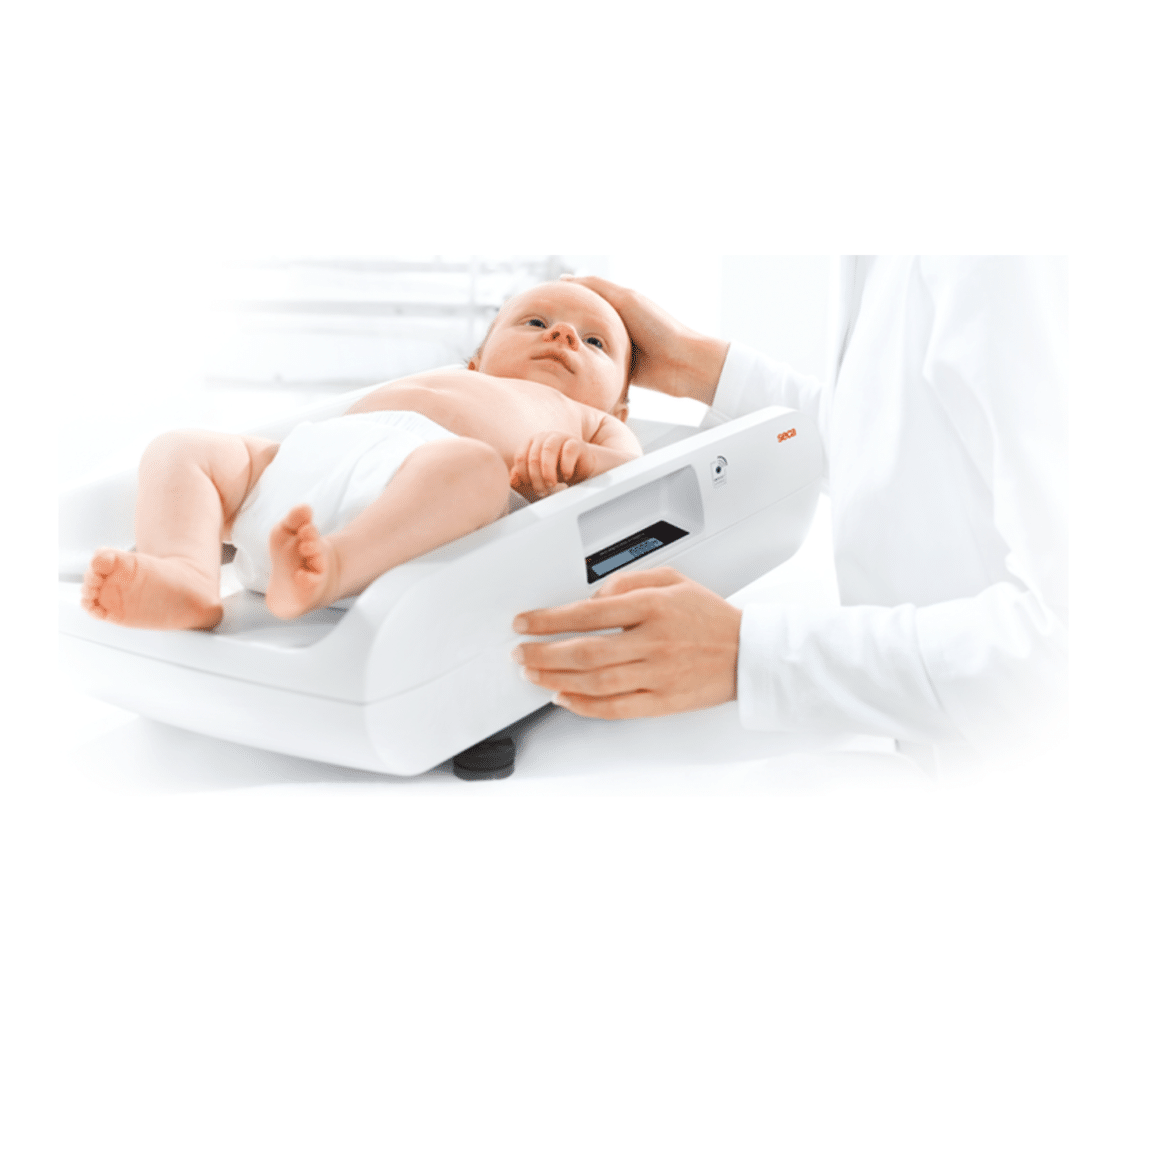 Seca 727 Digital Baby Scale with EMR